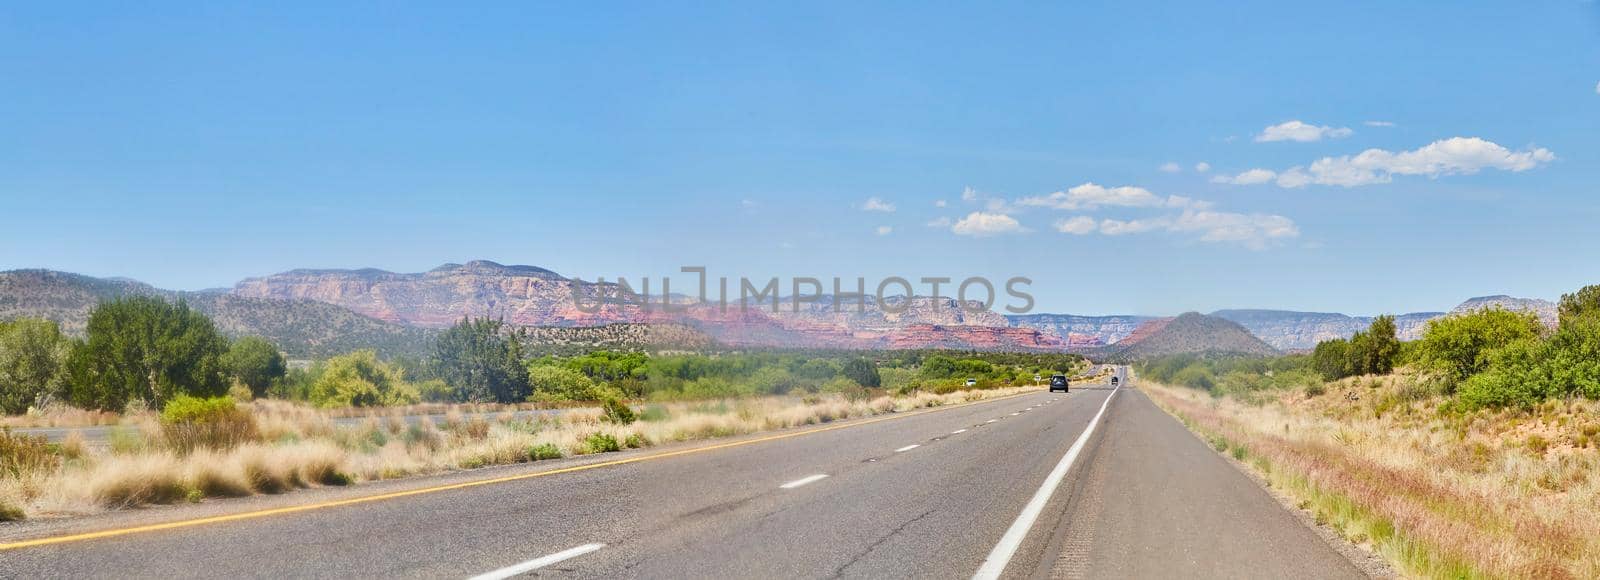 Image of Panorama of desert road with red mountains on horizon